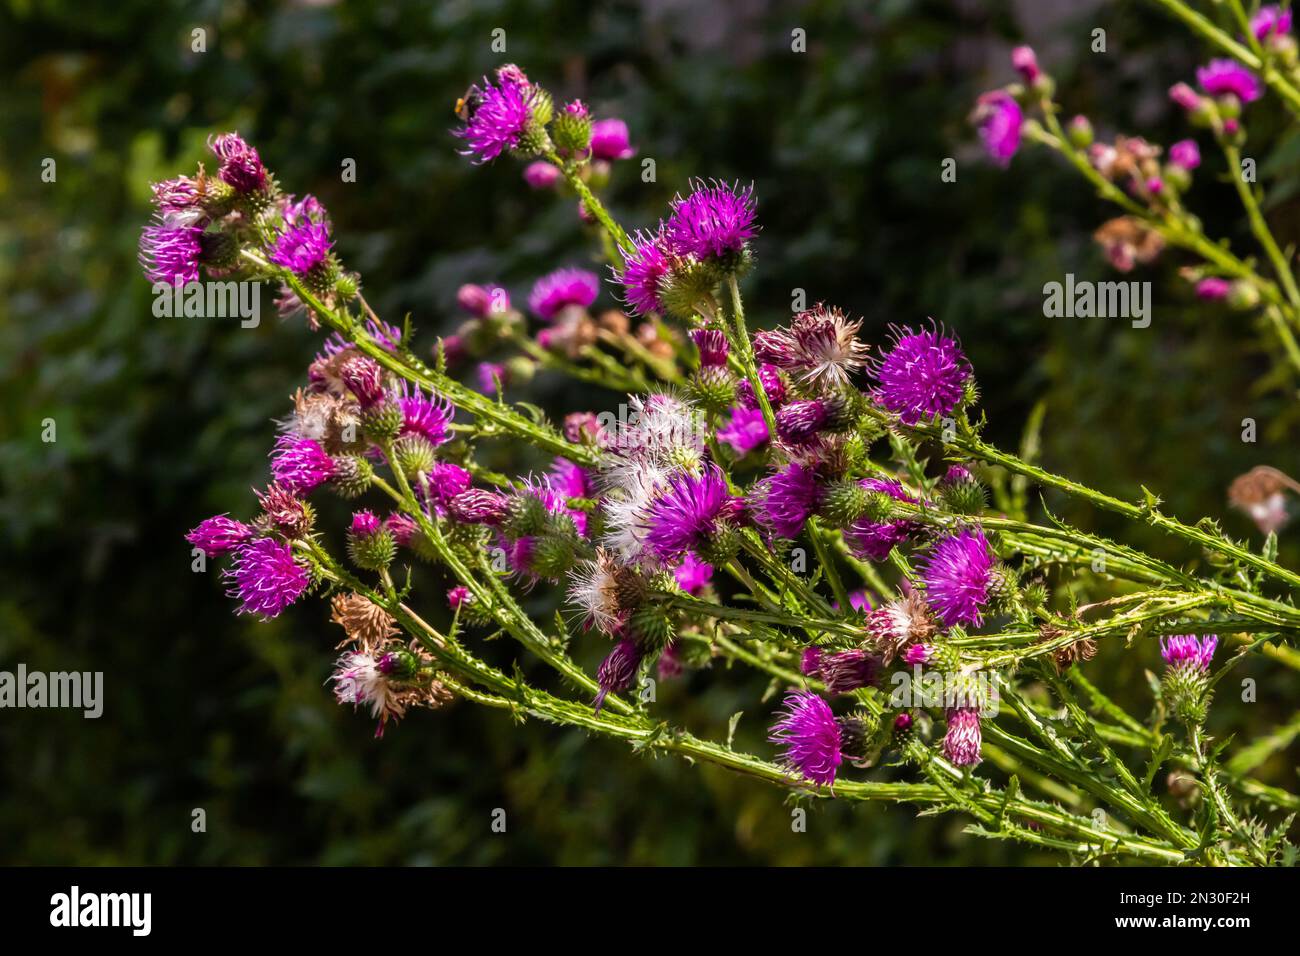 Flowering creeping thistle Cirsium arvense, also Canada thistle or field thistle. The creeping thistle is considered a noxious weed in many countries. Stock Photo